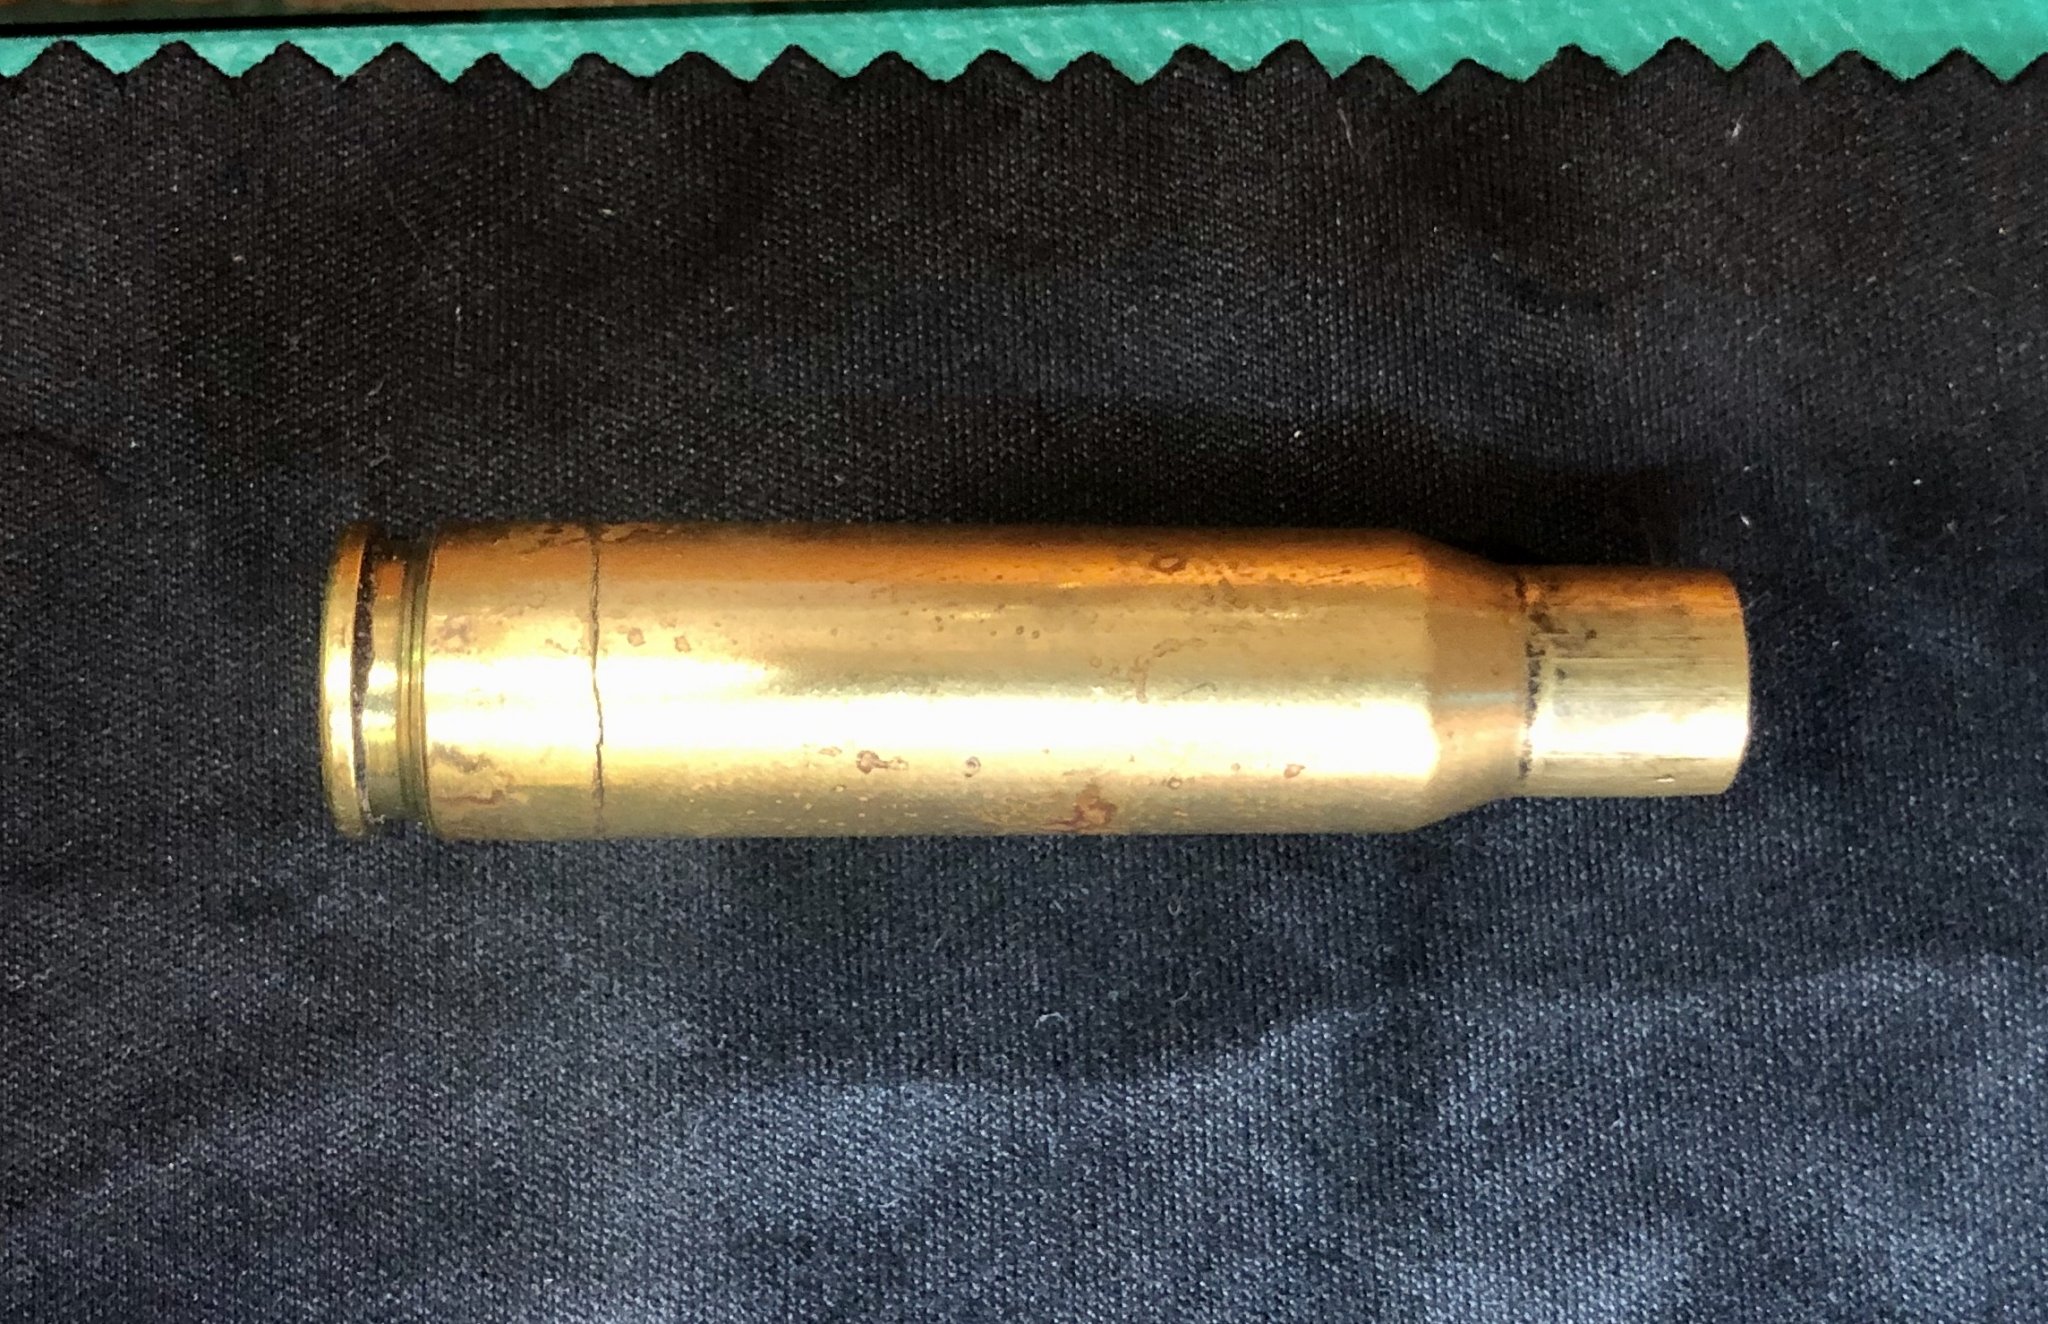 Detailed magnified pictures of brass prep